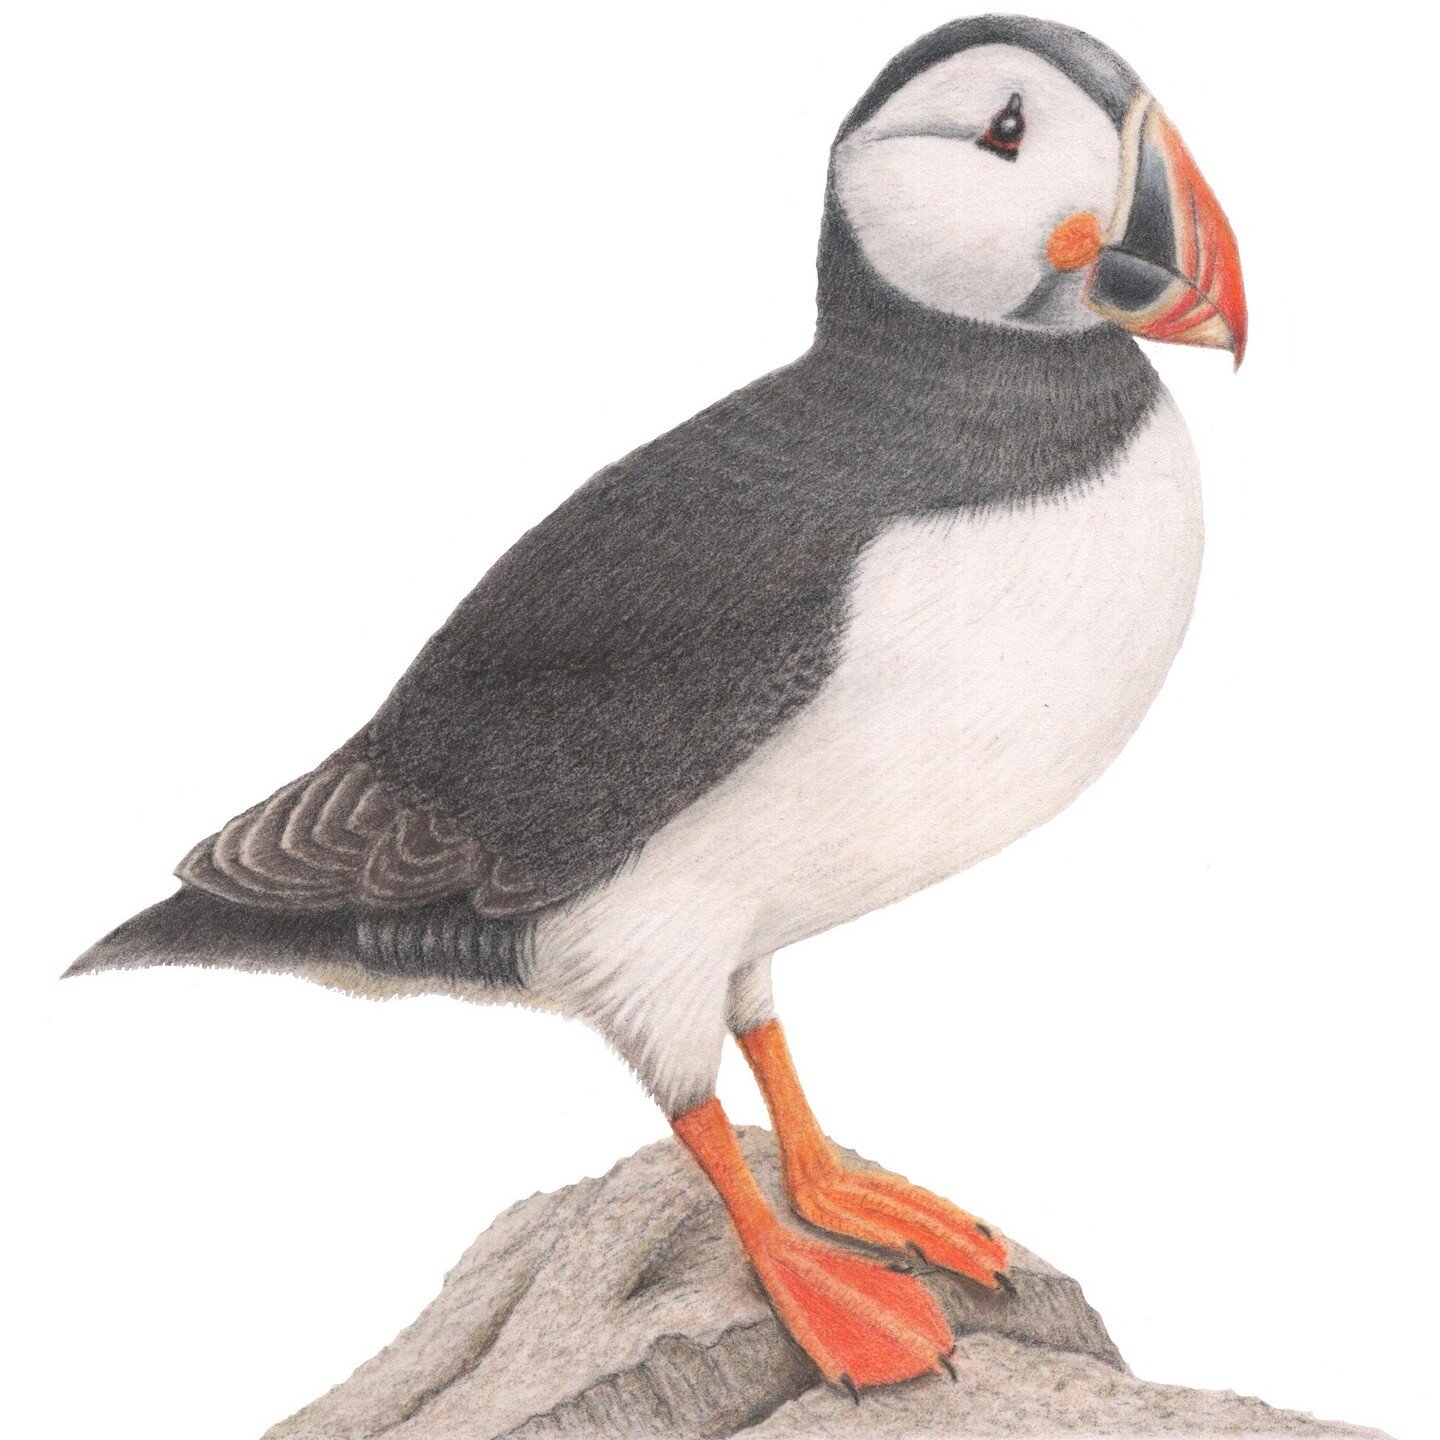 I've not been posting much for a while as I've been working on a number of commissions for Christmas but managed to fit in this little guy in between.

Hope you like him.

#puffin #puffinart #seabirds #colouredpencils #ukcps